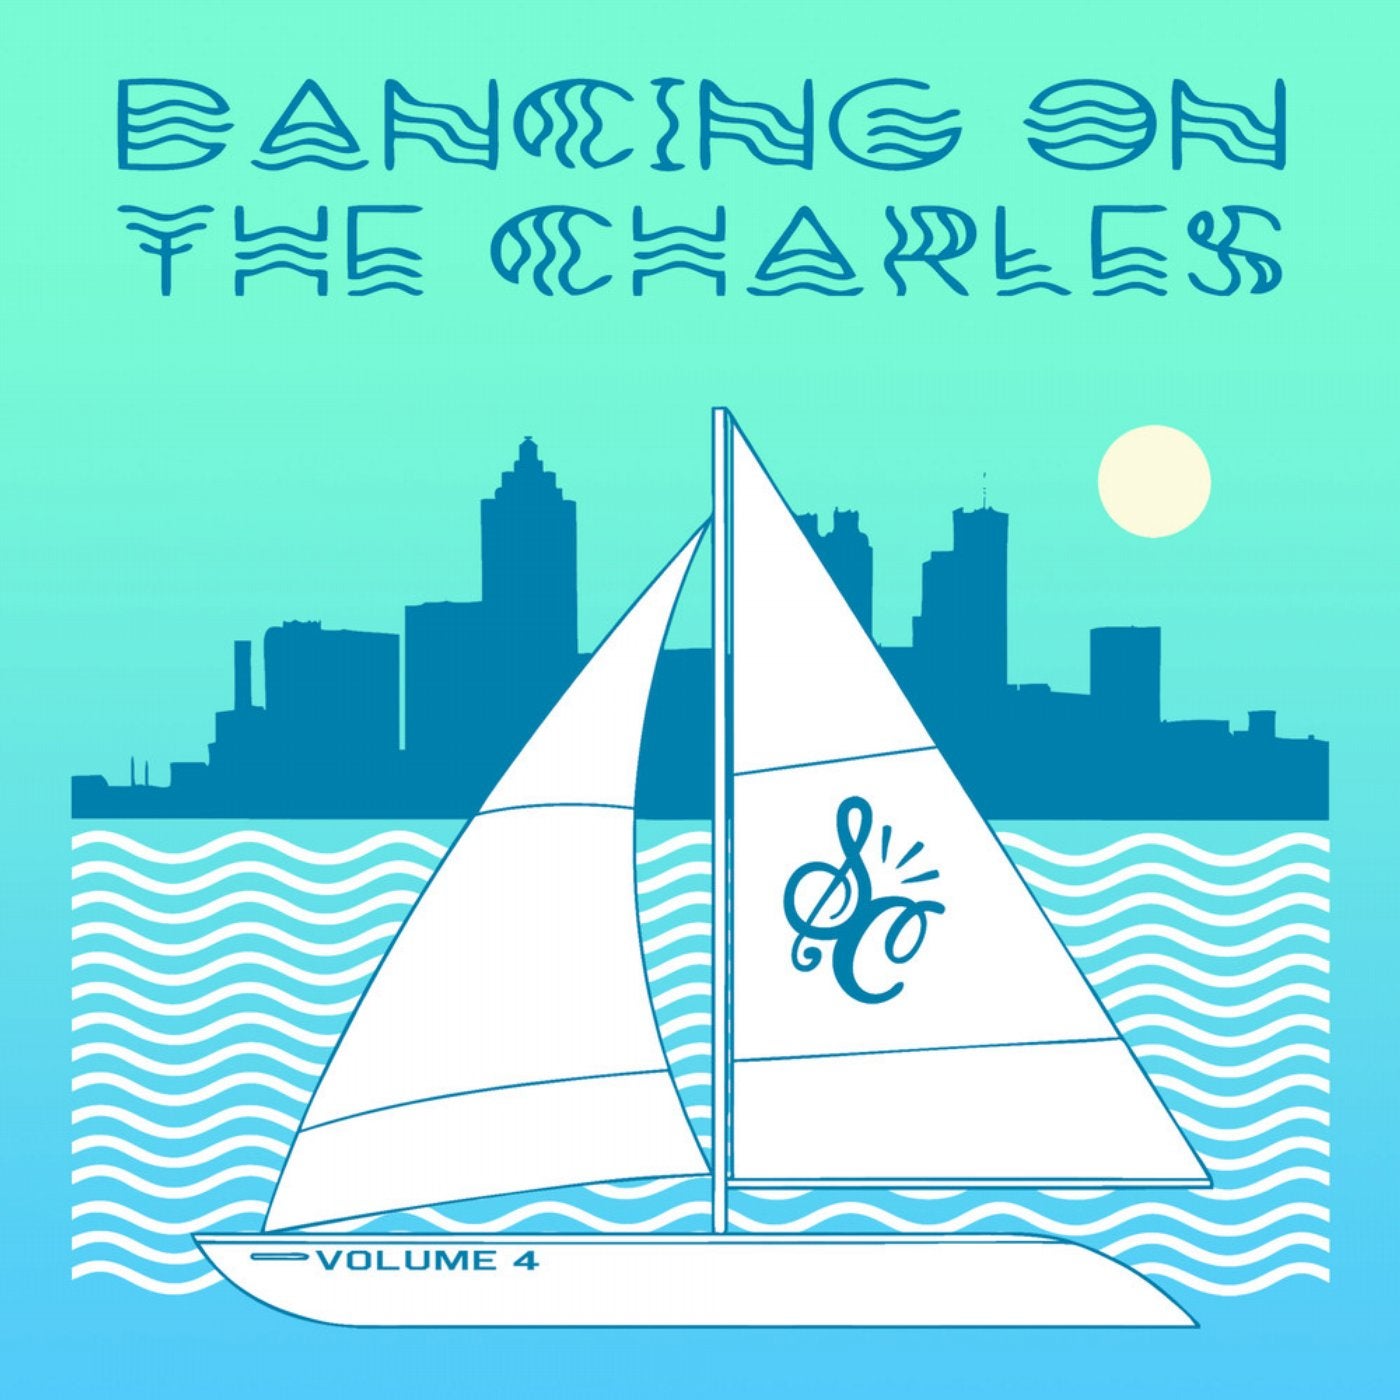 Soul Clap Presents: Dancing on the Charles, Vol. 4